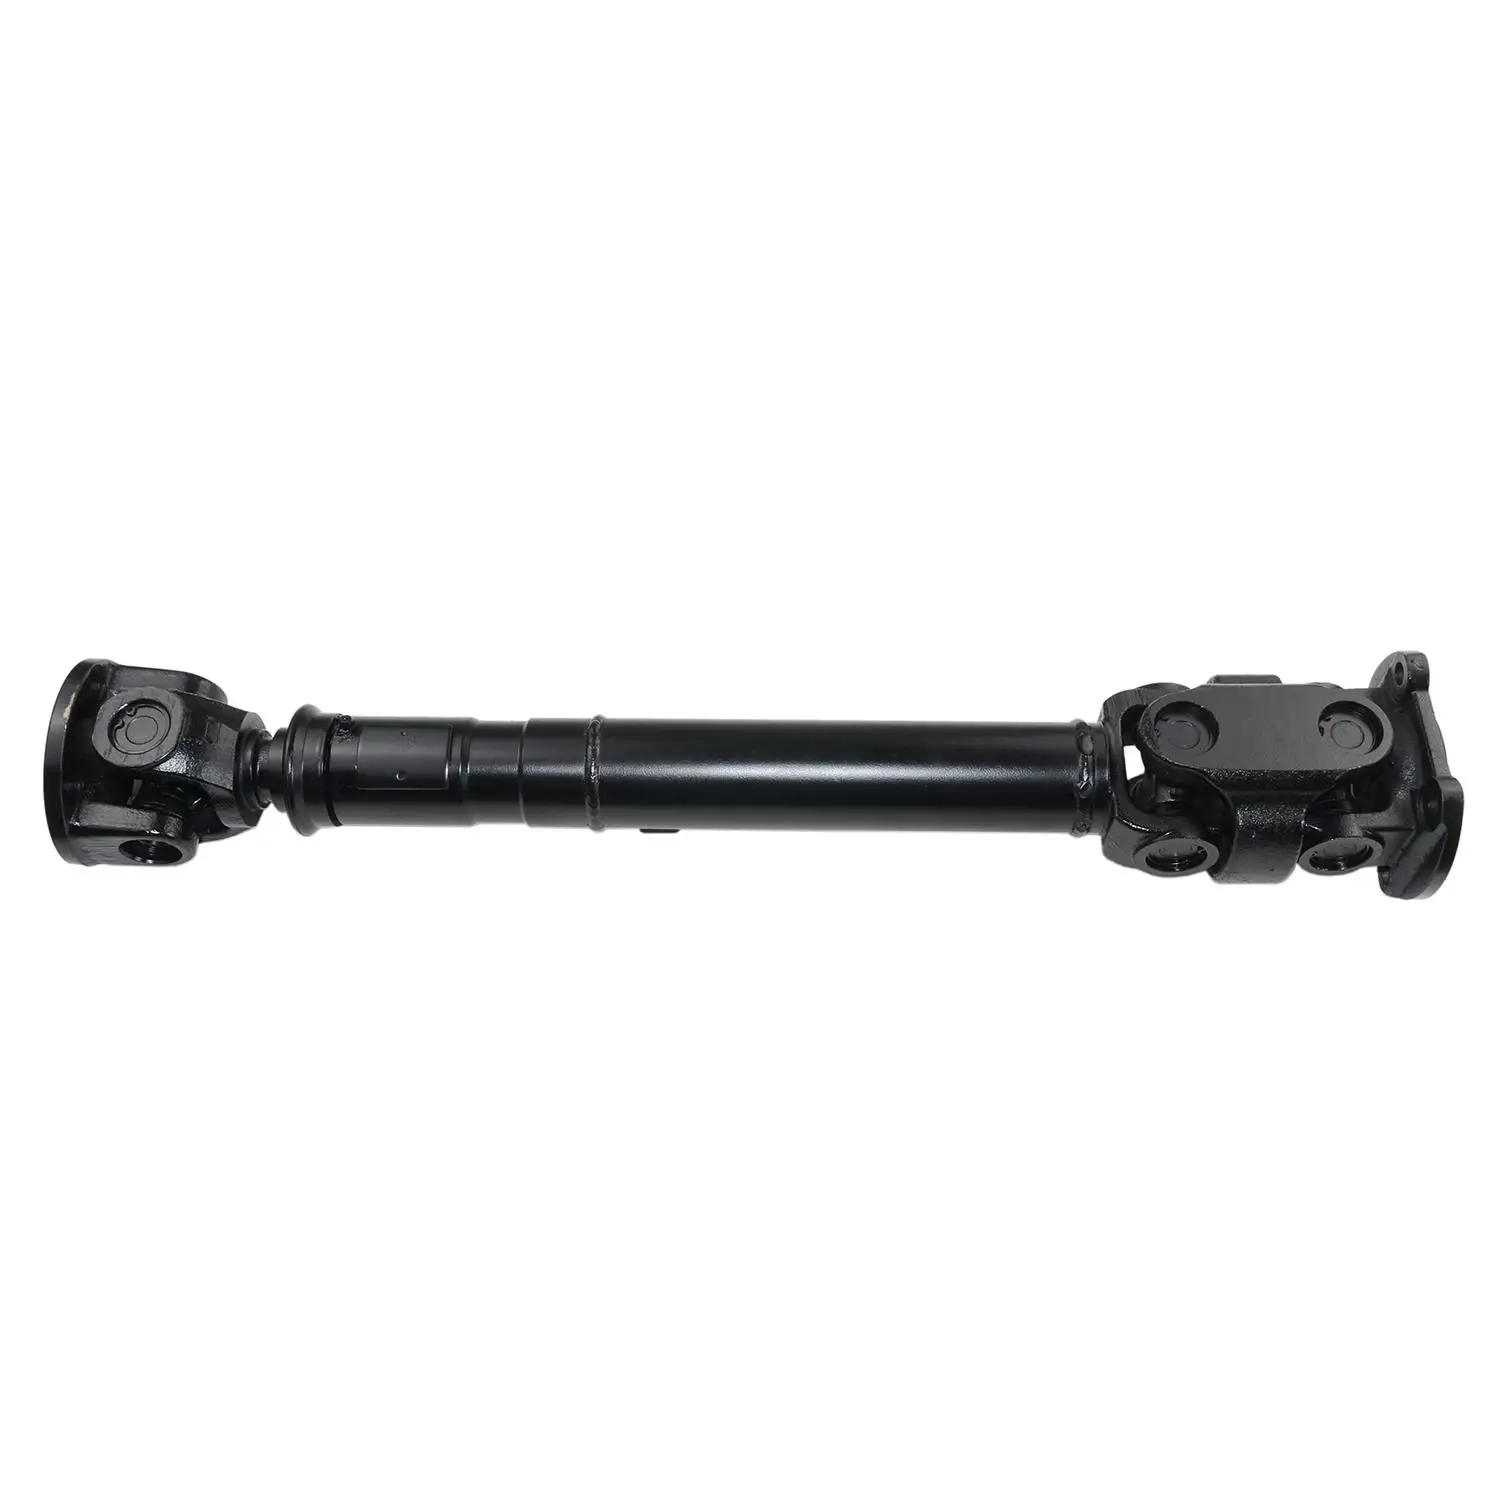 

AP03 Brand New TVB000110 Front Propshaft Heavy Duty Double Cardan For Land Rover Discovery MK II 2.5 4.0